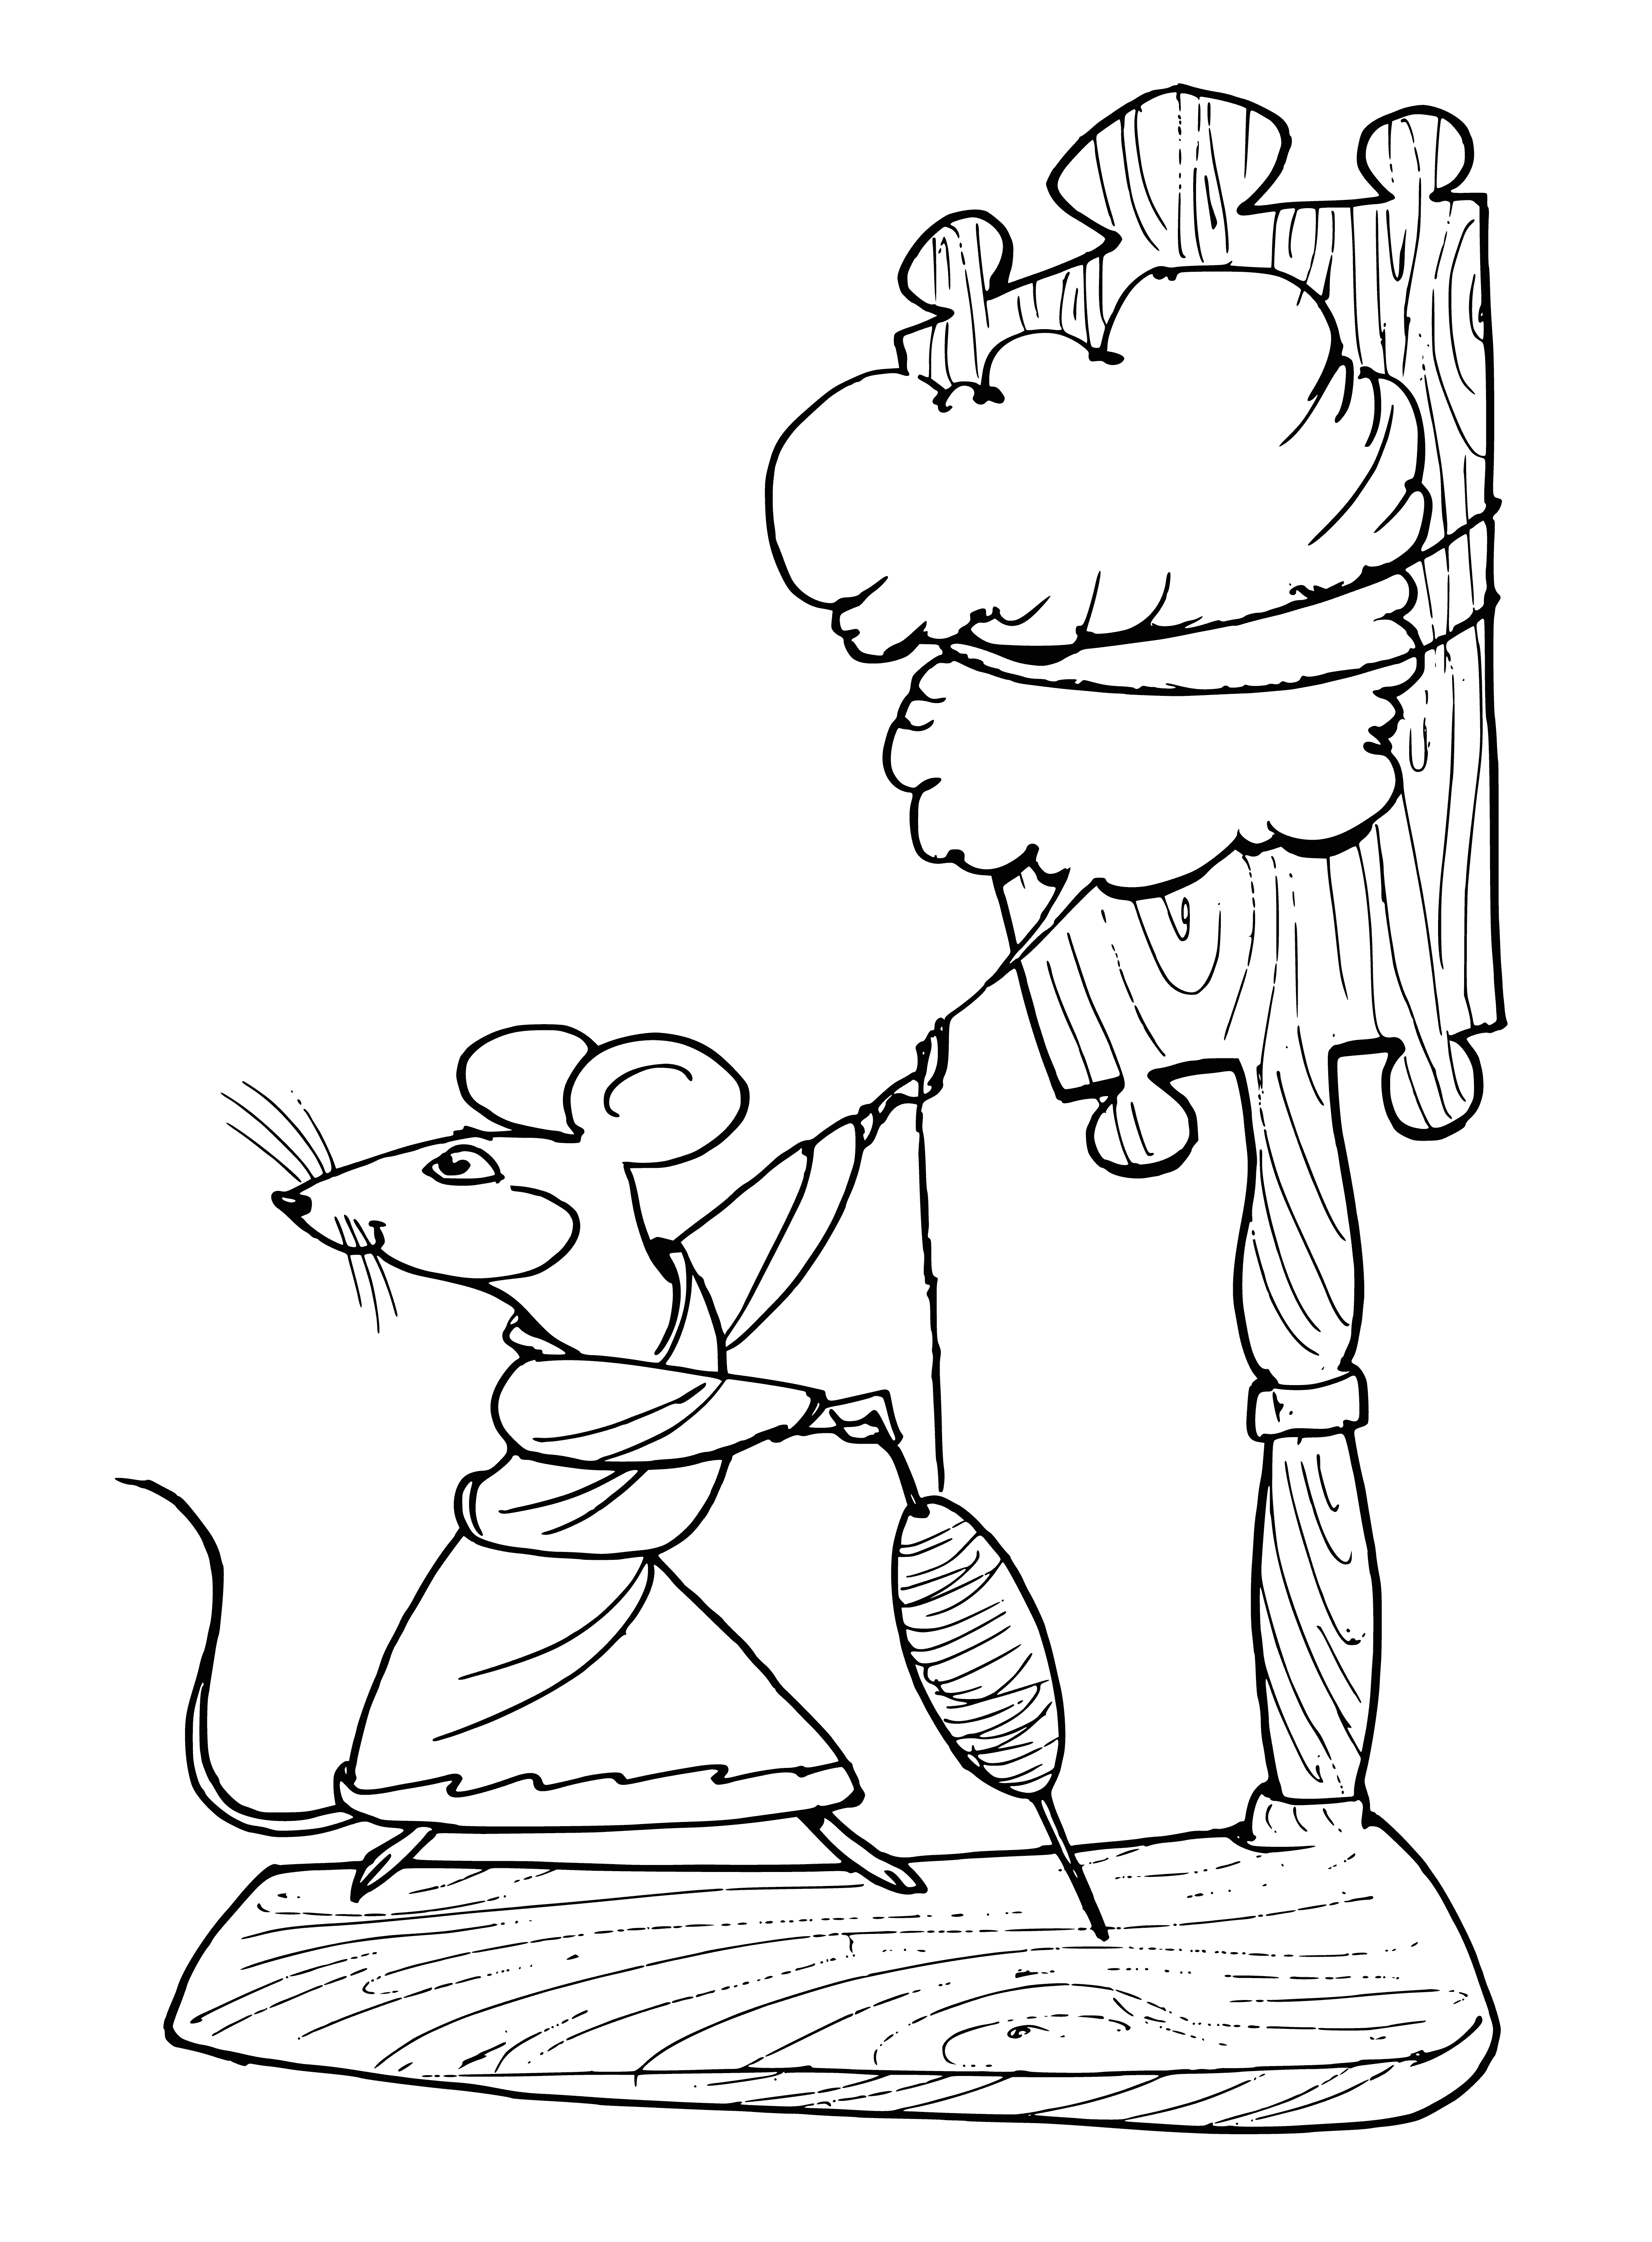 coloring page: A small mouse with a long brown & white-bellied tail sits on a log in the forest in this folk tale coloring page.